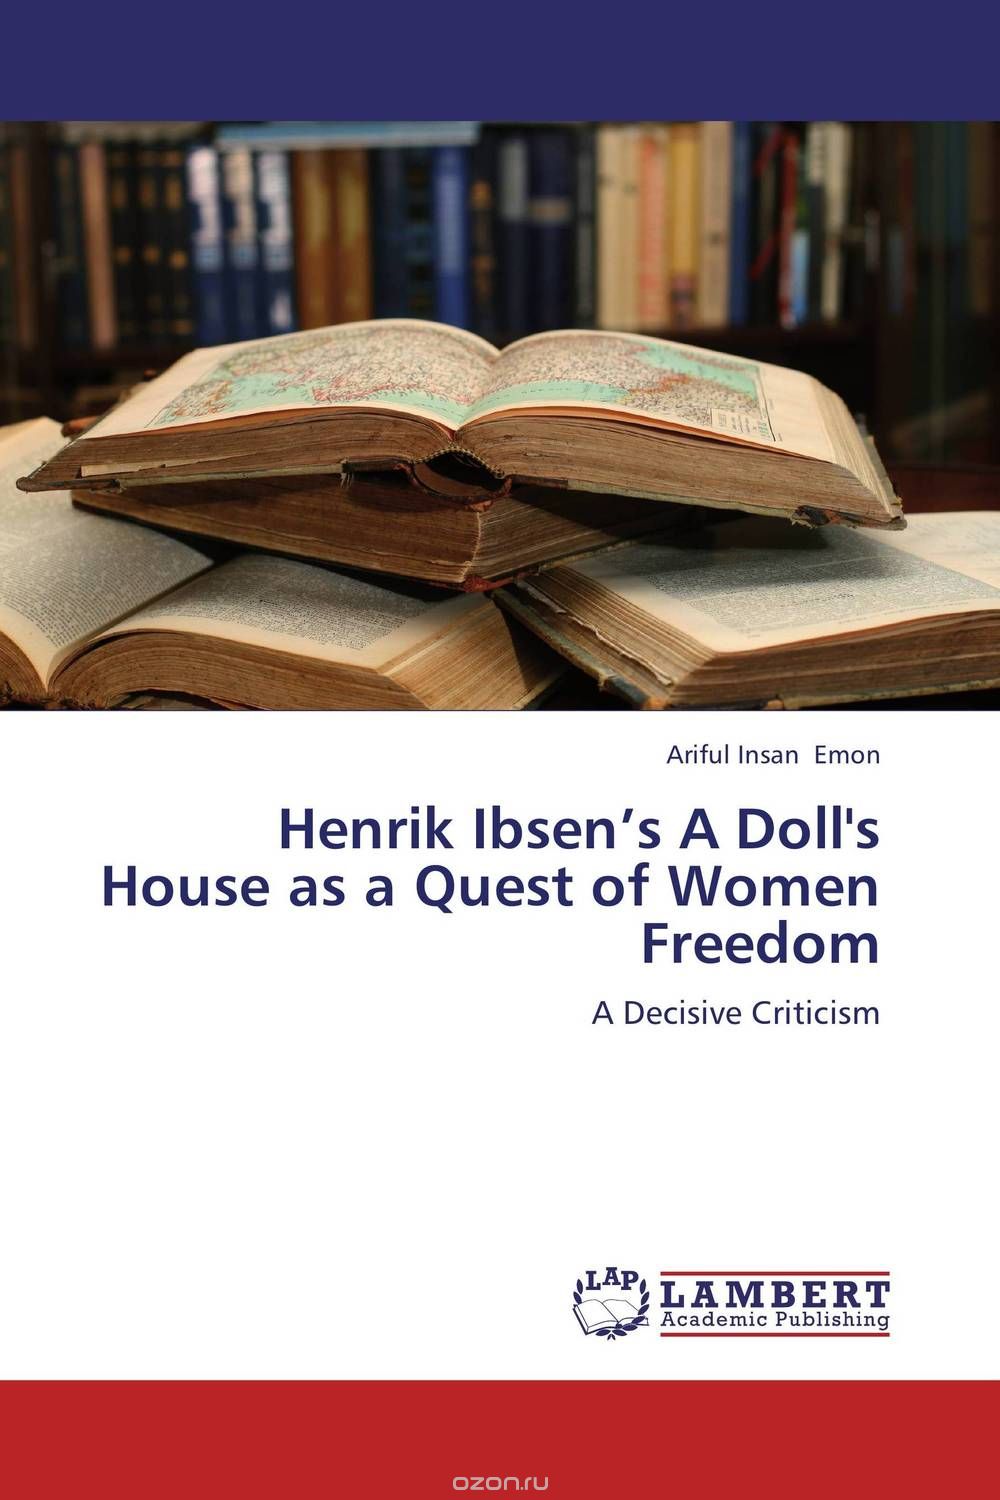 Henrik Ibsen’s A Doll's House as a Quest of Women Freedom